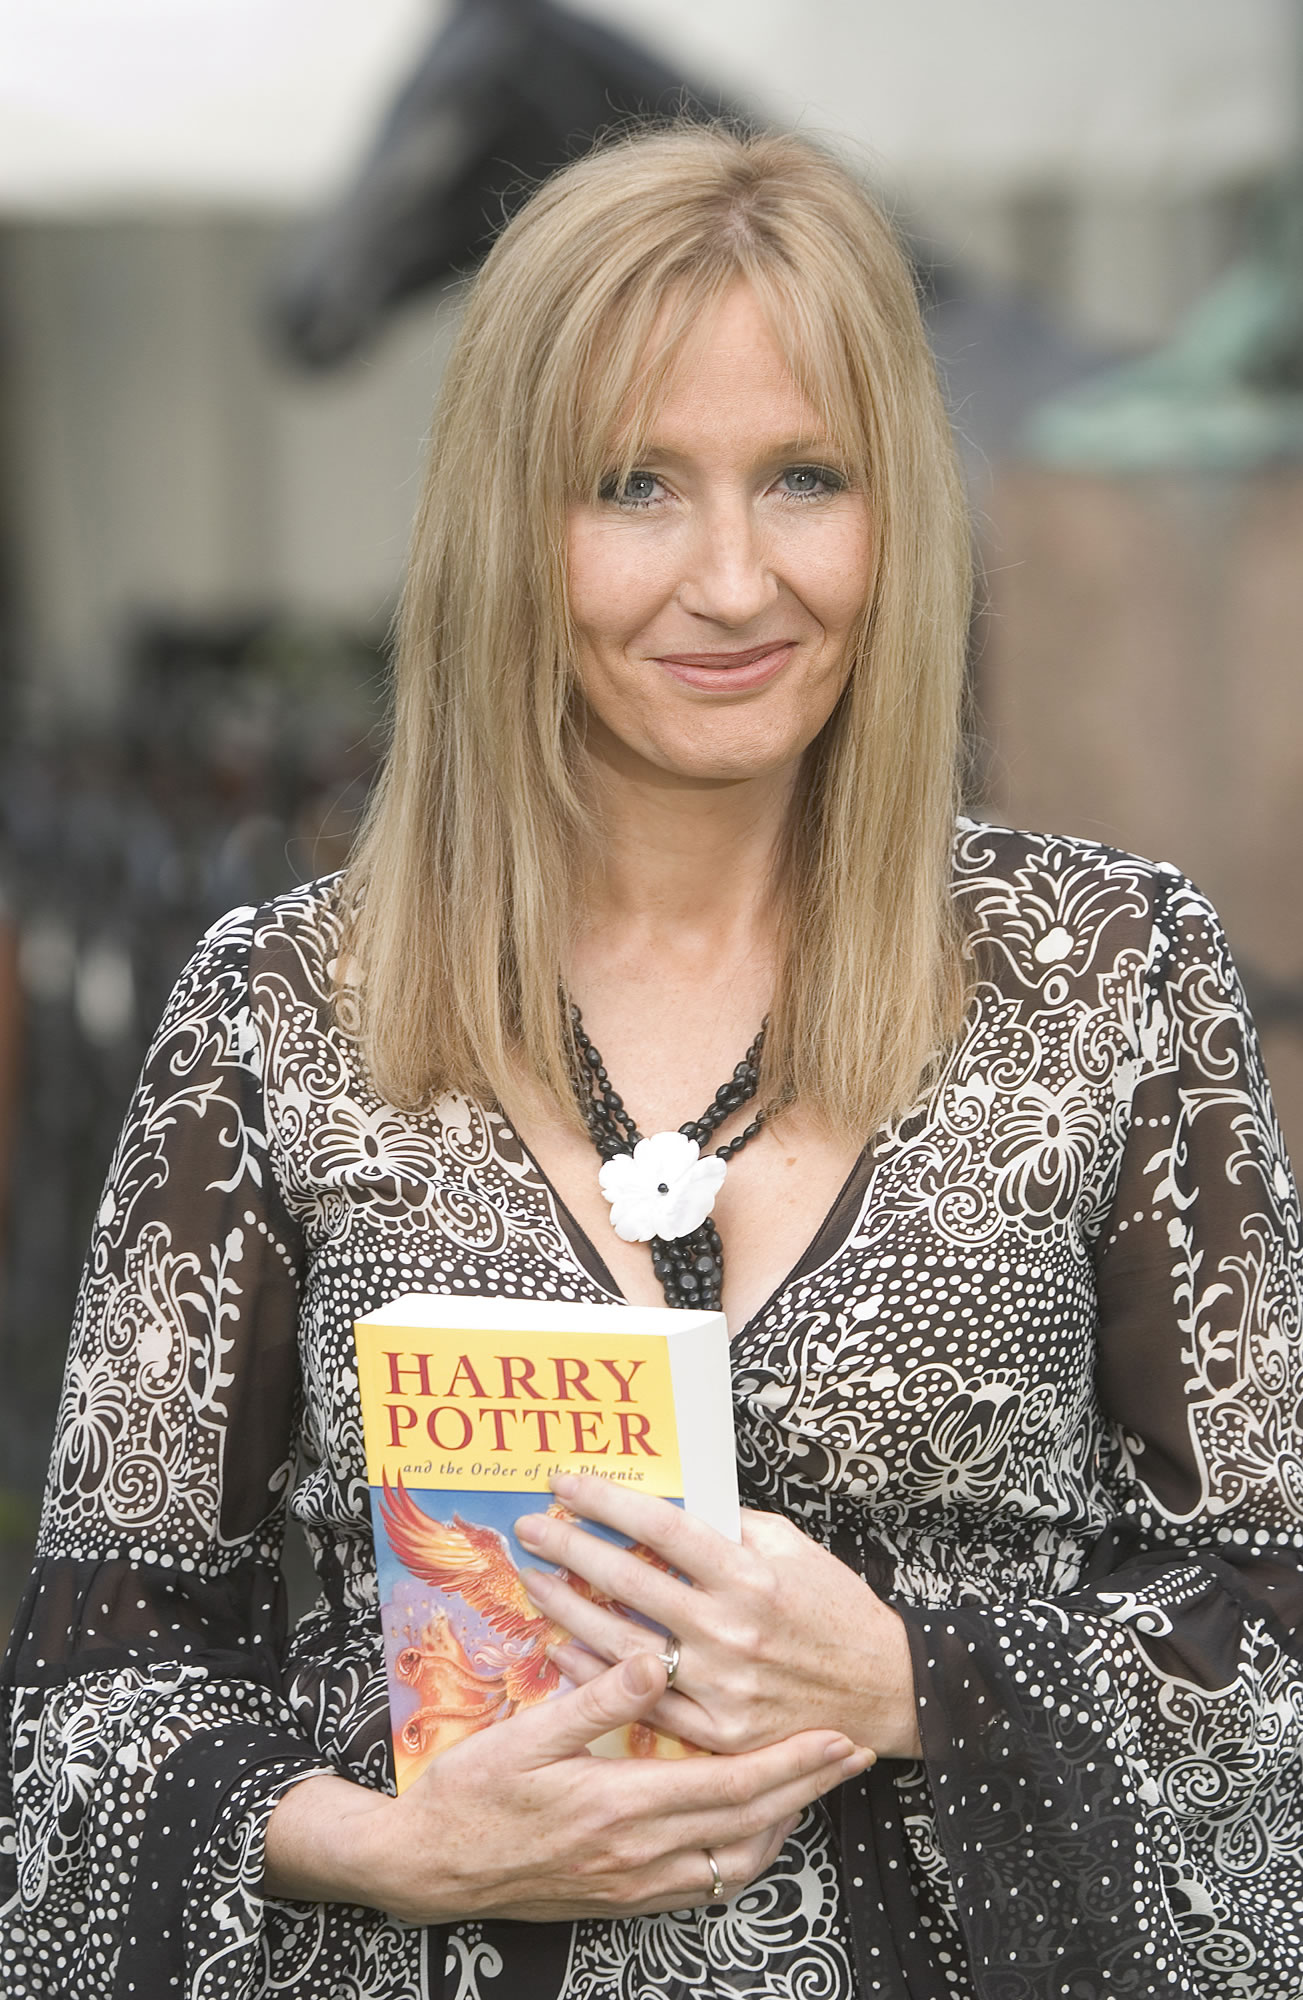 Joanne Rowling photo 6 of 16 pics, wallpaper - photo #298778 - ThePlace2